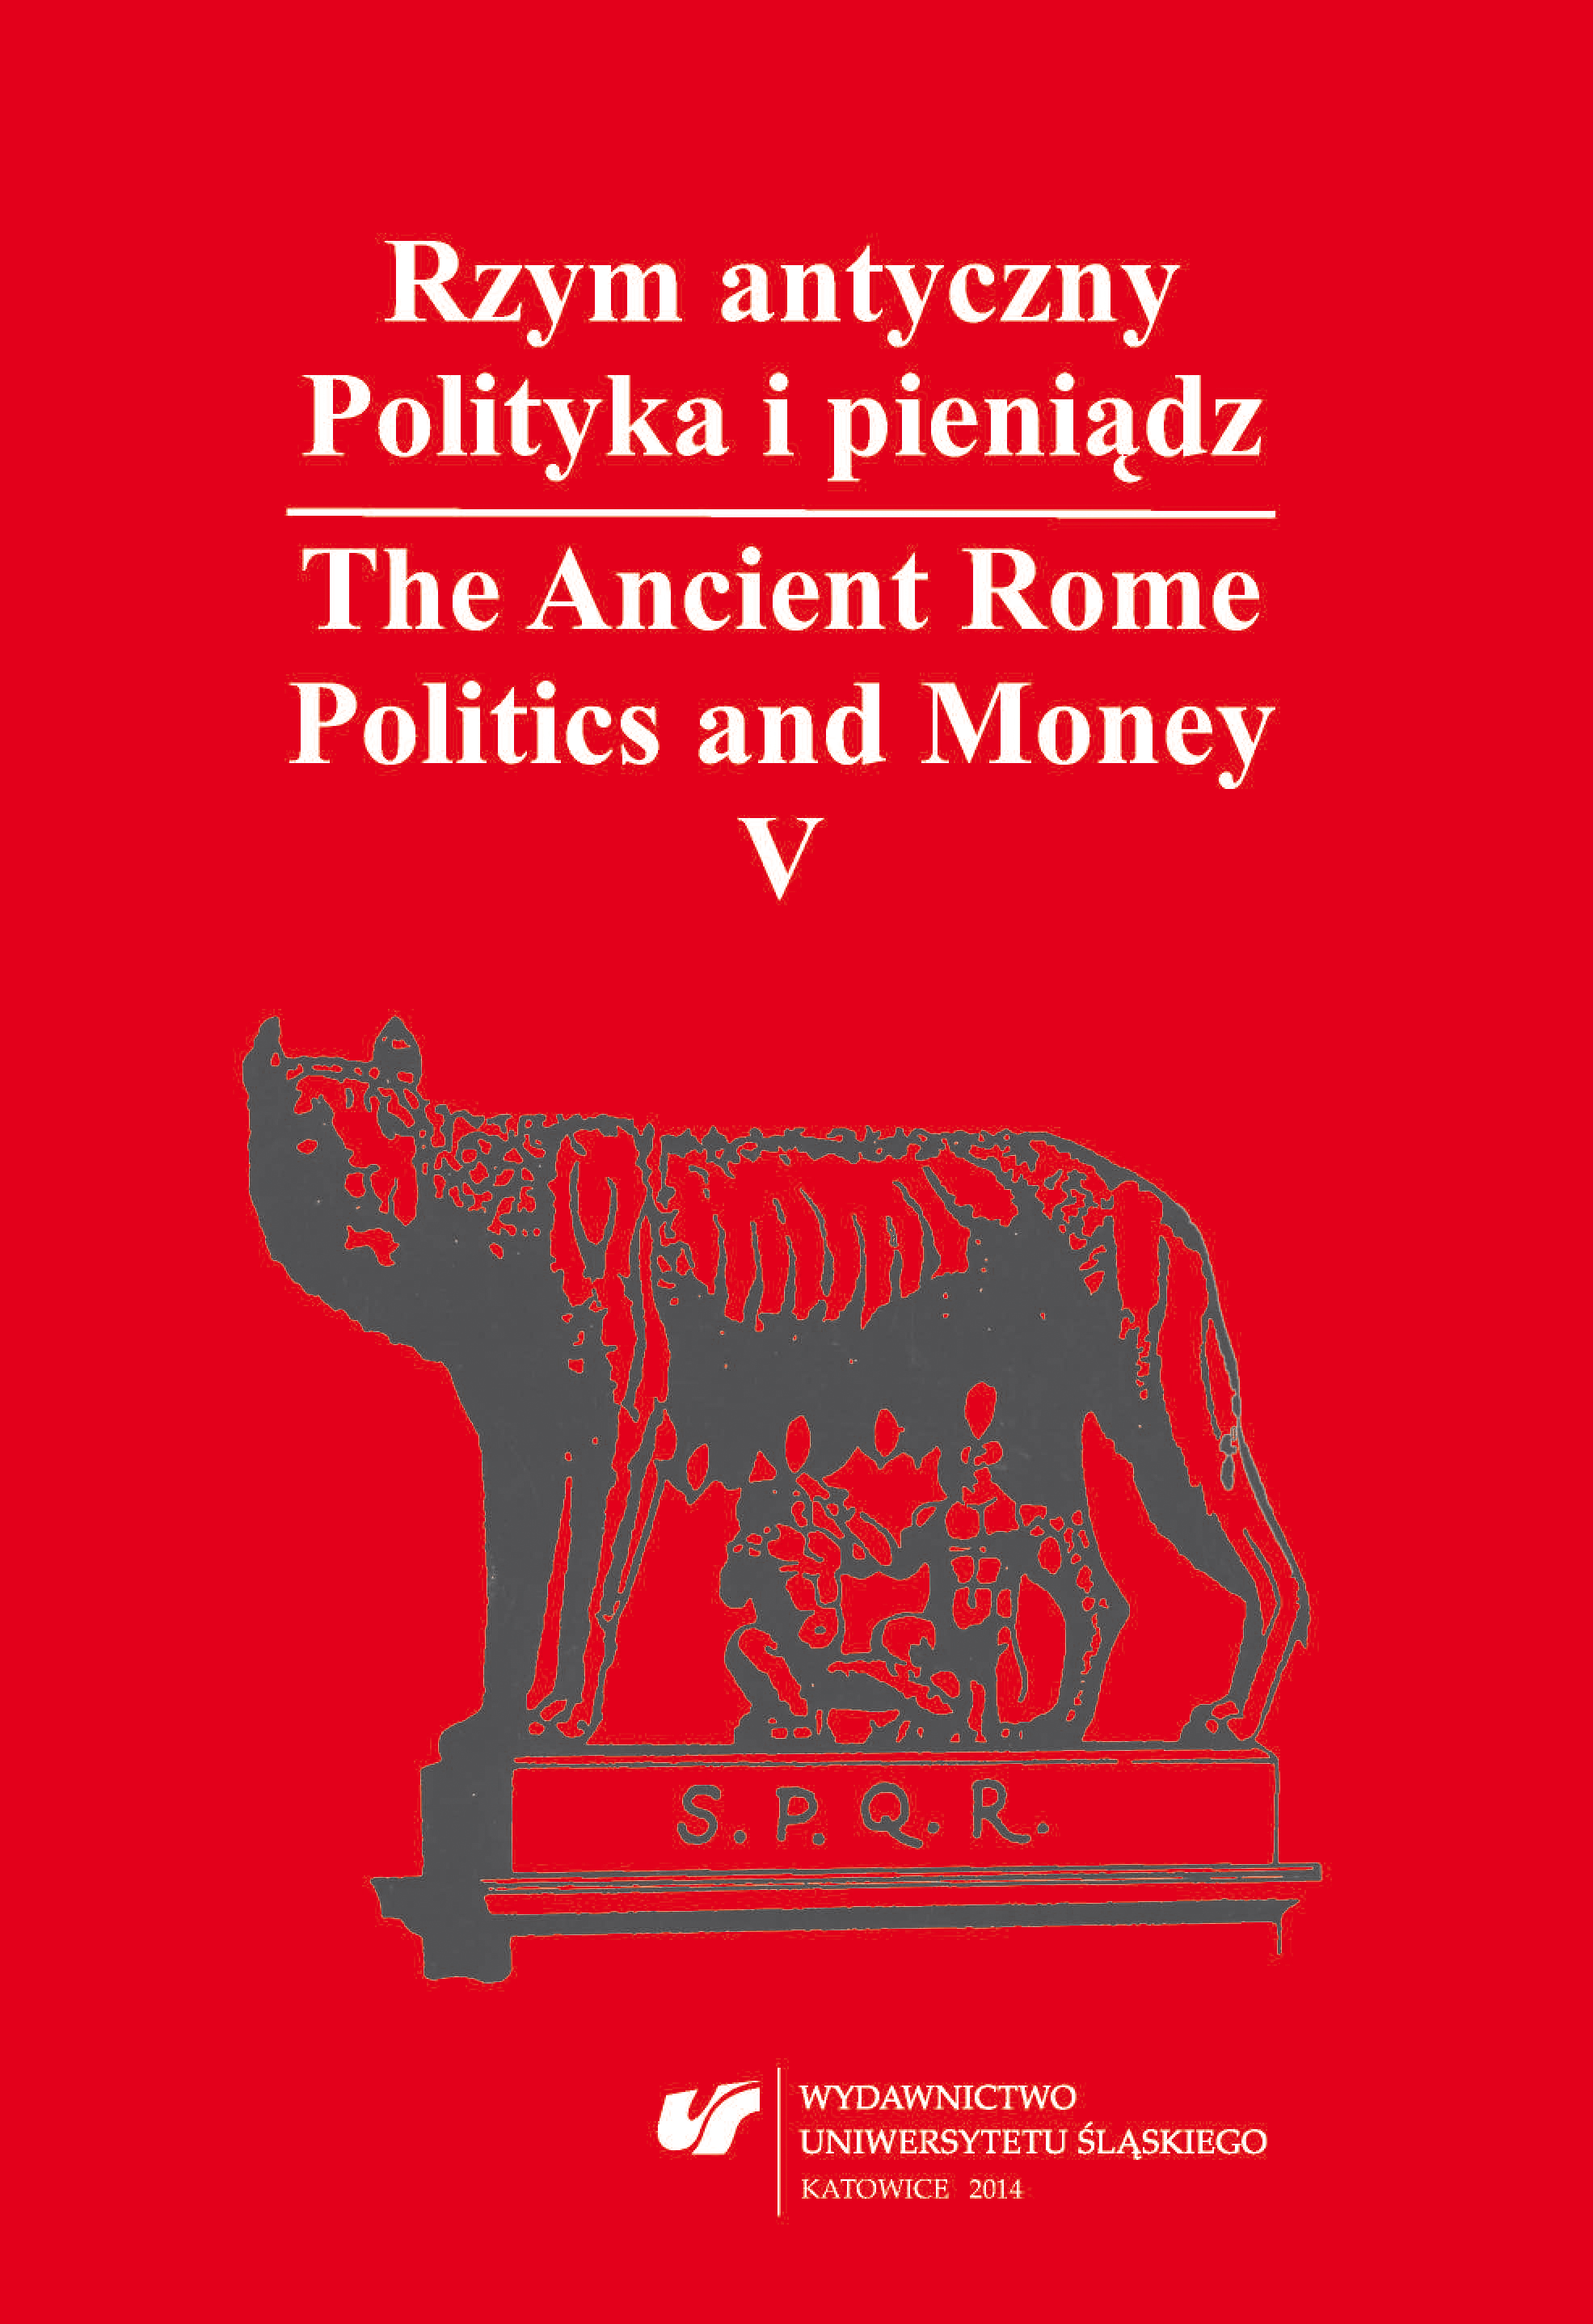 Ancient Rome. Politics and money / The Ancient Rome. Politics and Money. Vol. 5: Asia Minor in Roman Times